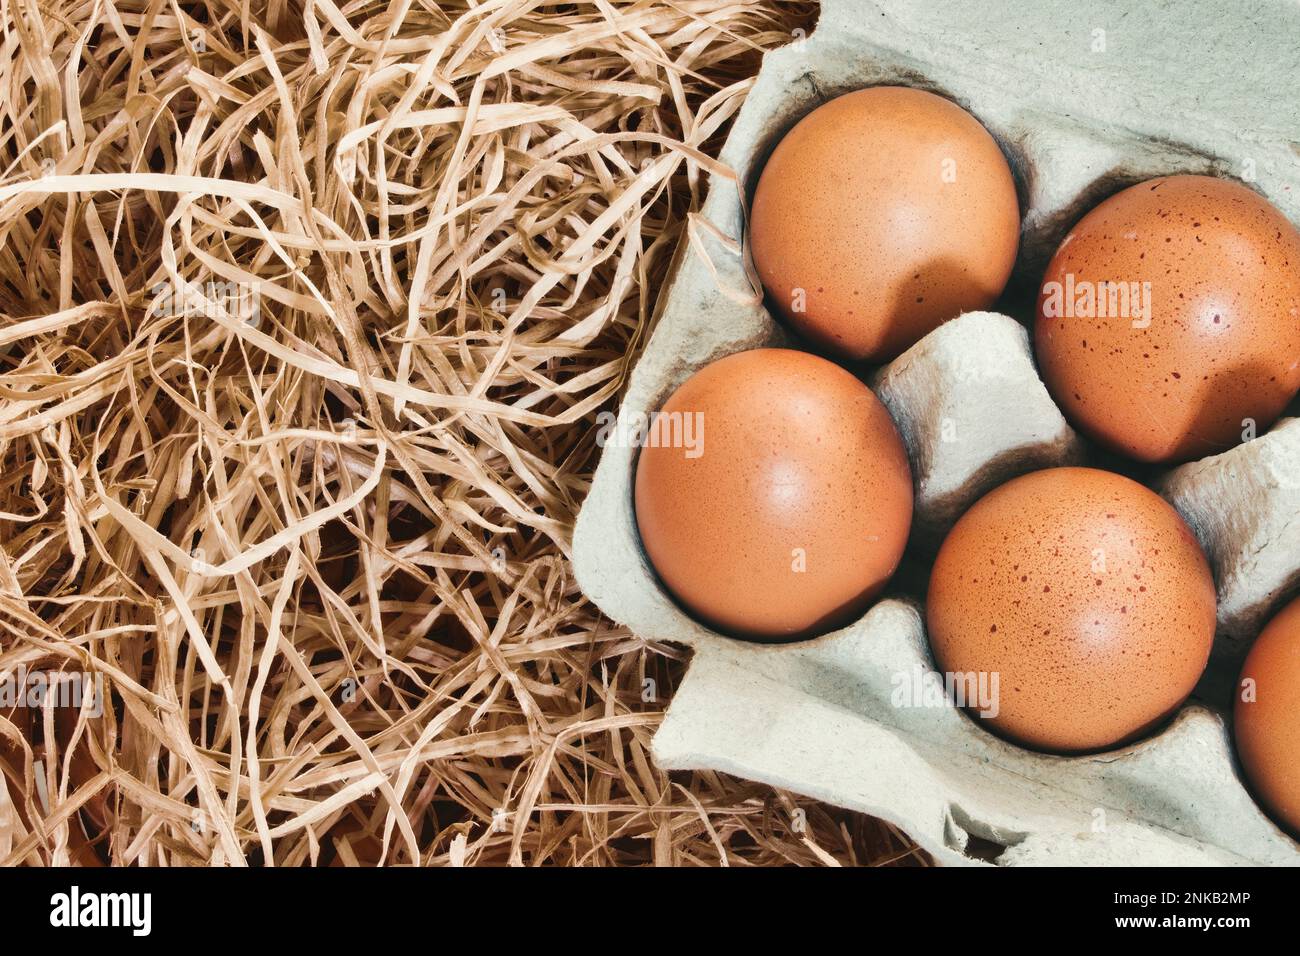 Close-up of brown chicken's eggs in a cardboard carton against straw background Stock Photo